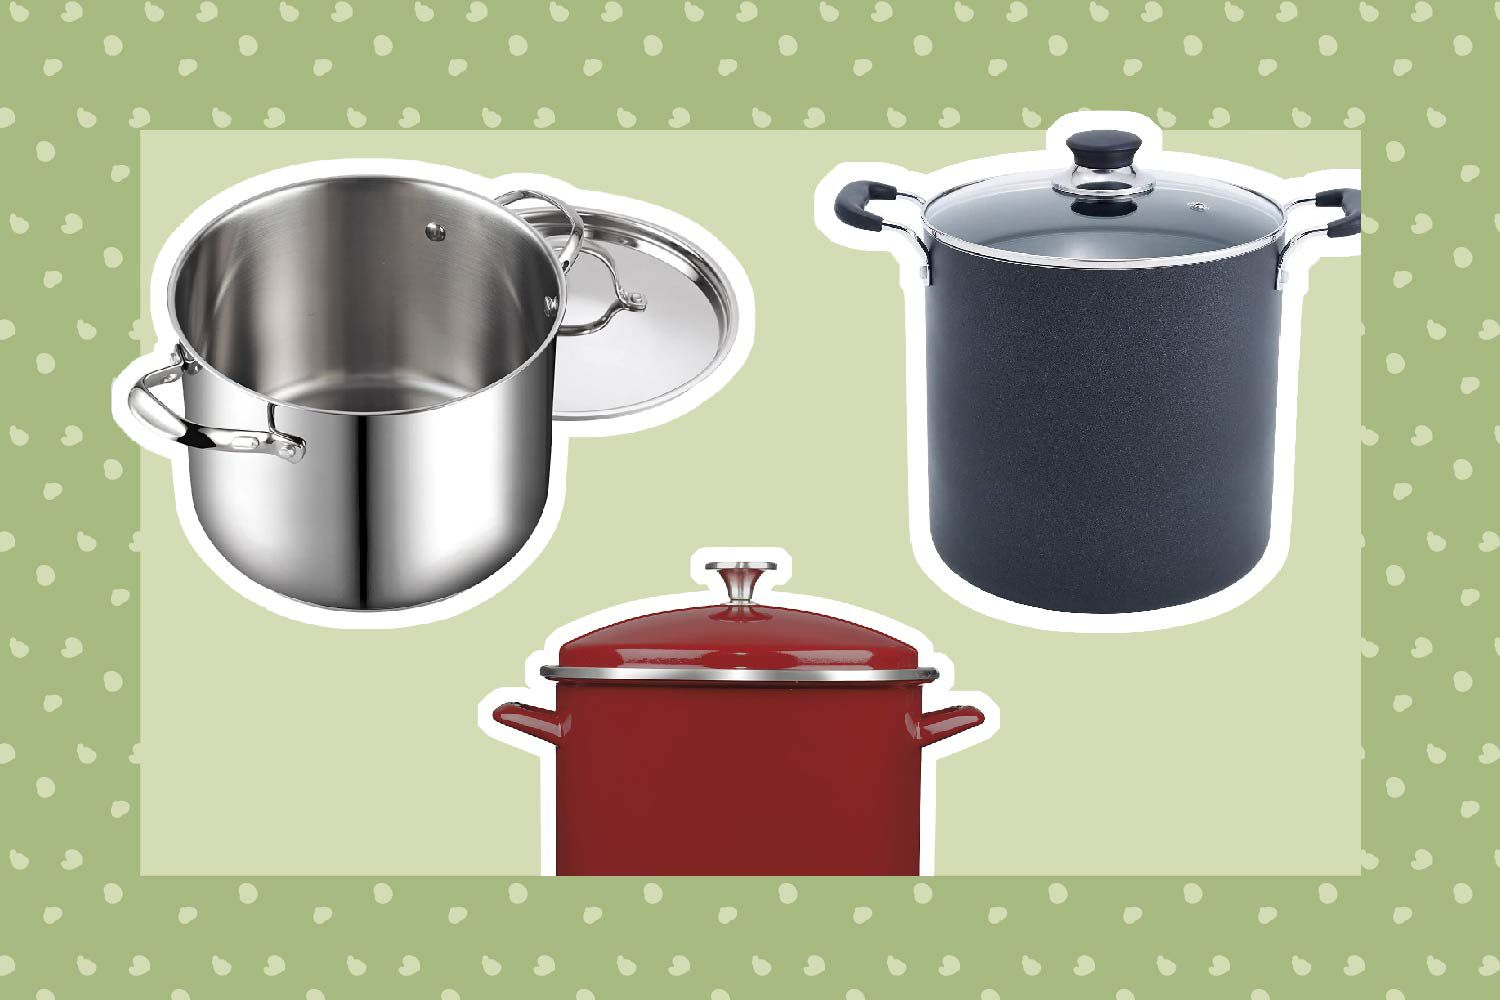 Best stockpots collaged against green polka dot background